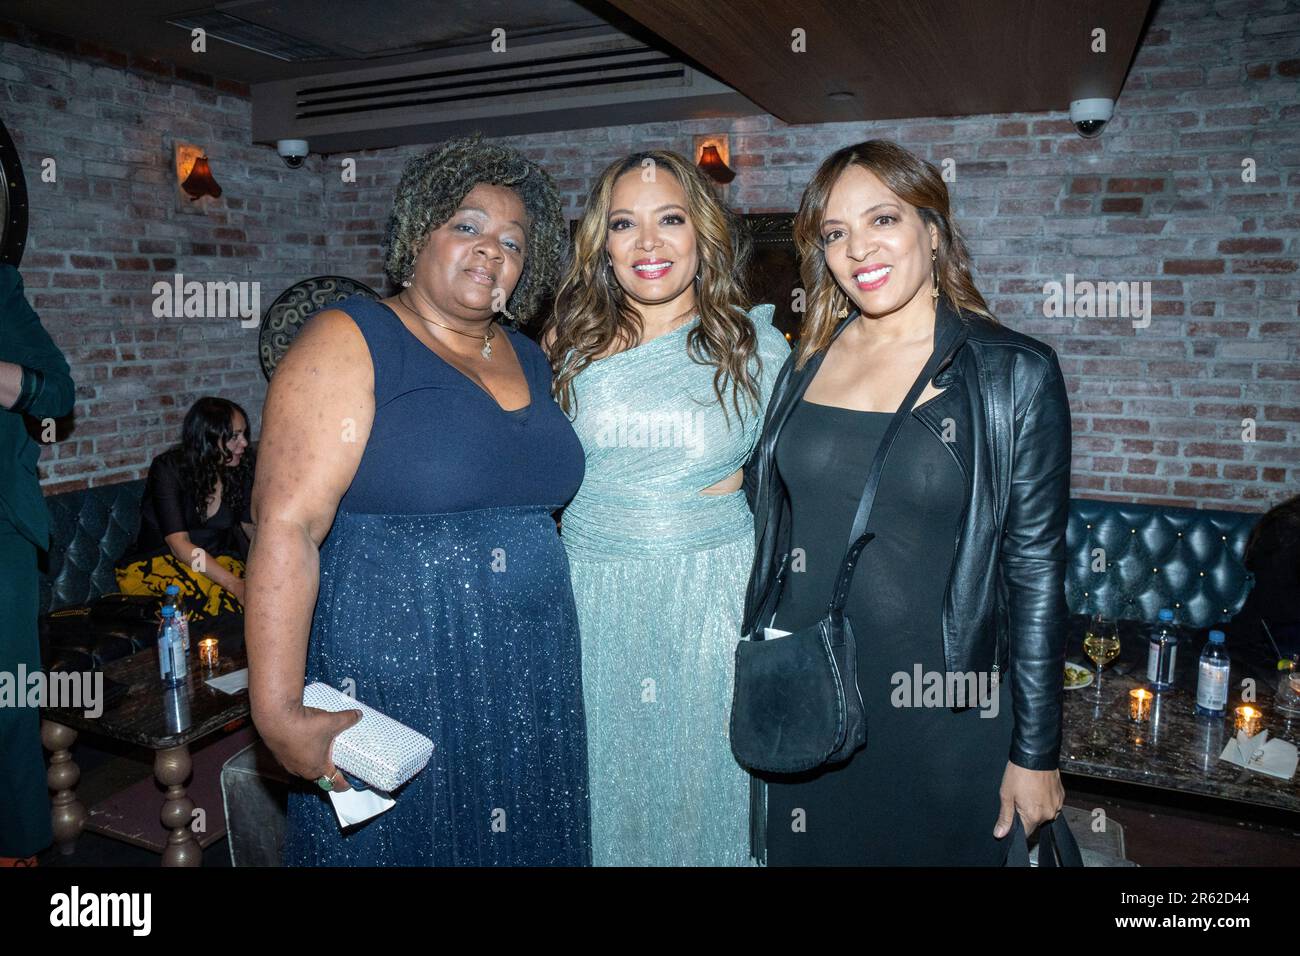 Transformers The Rise Of The Beasts New York City Red Carpet and Premiere at the Kings Theater in Brooklyn Luna Laura Velez and friends at Tao Stock Photo